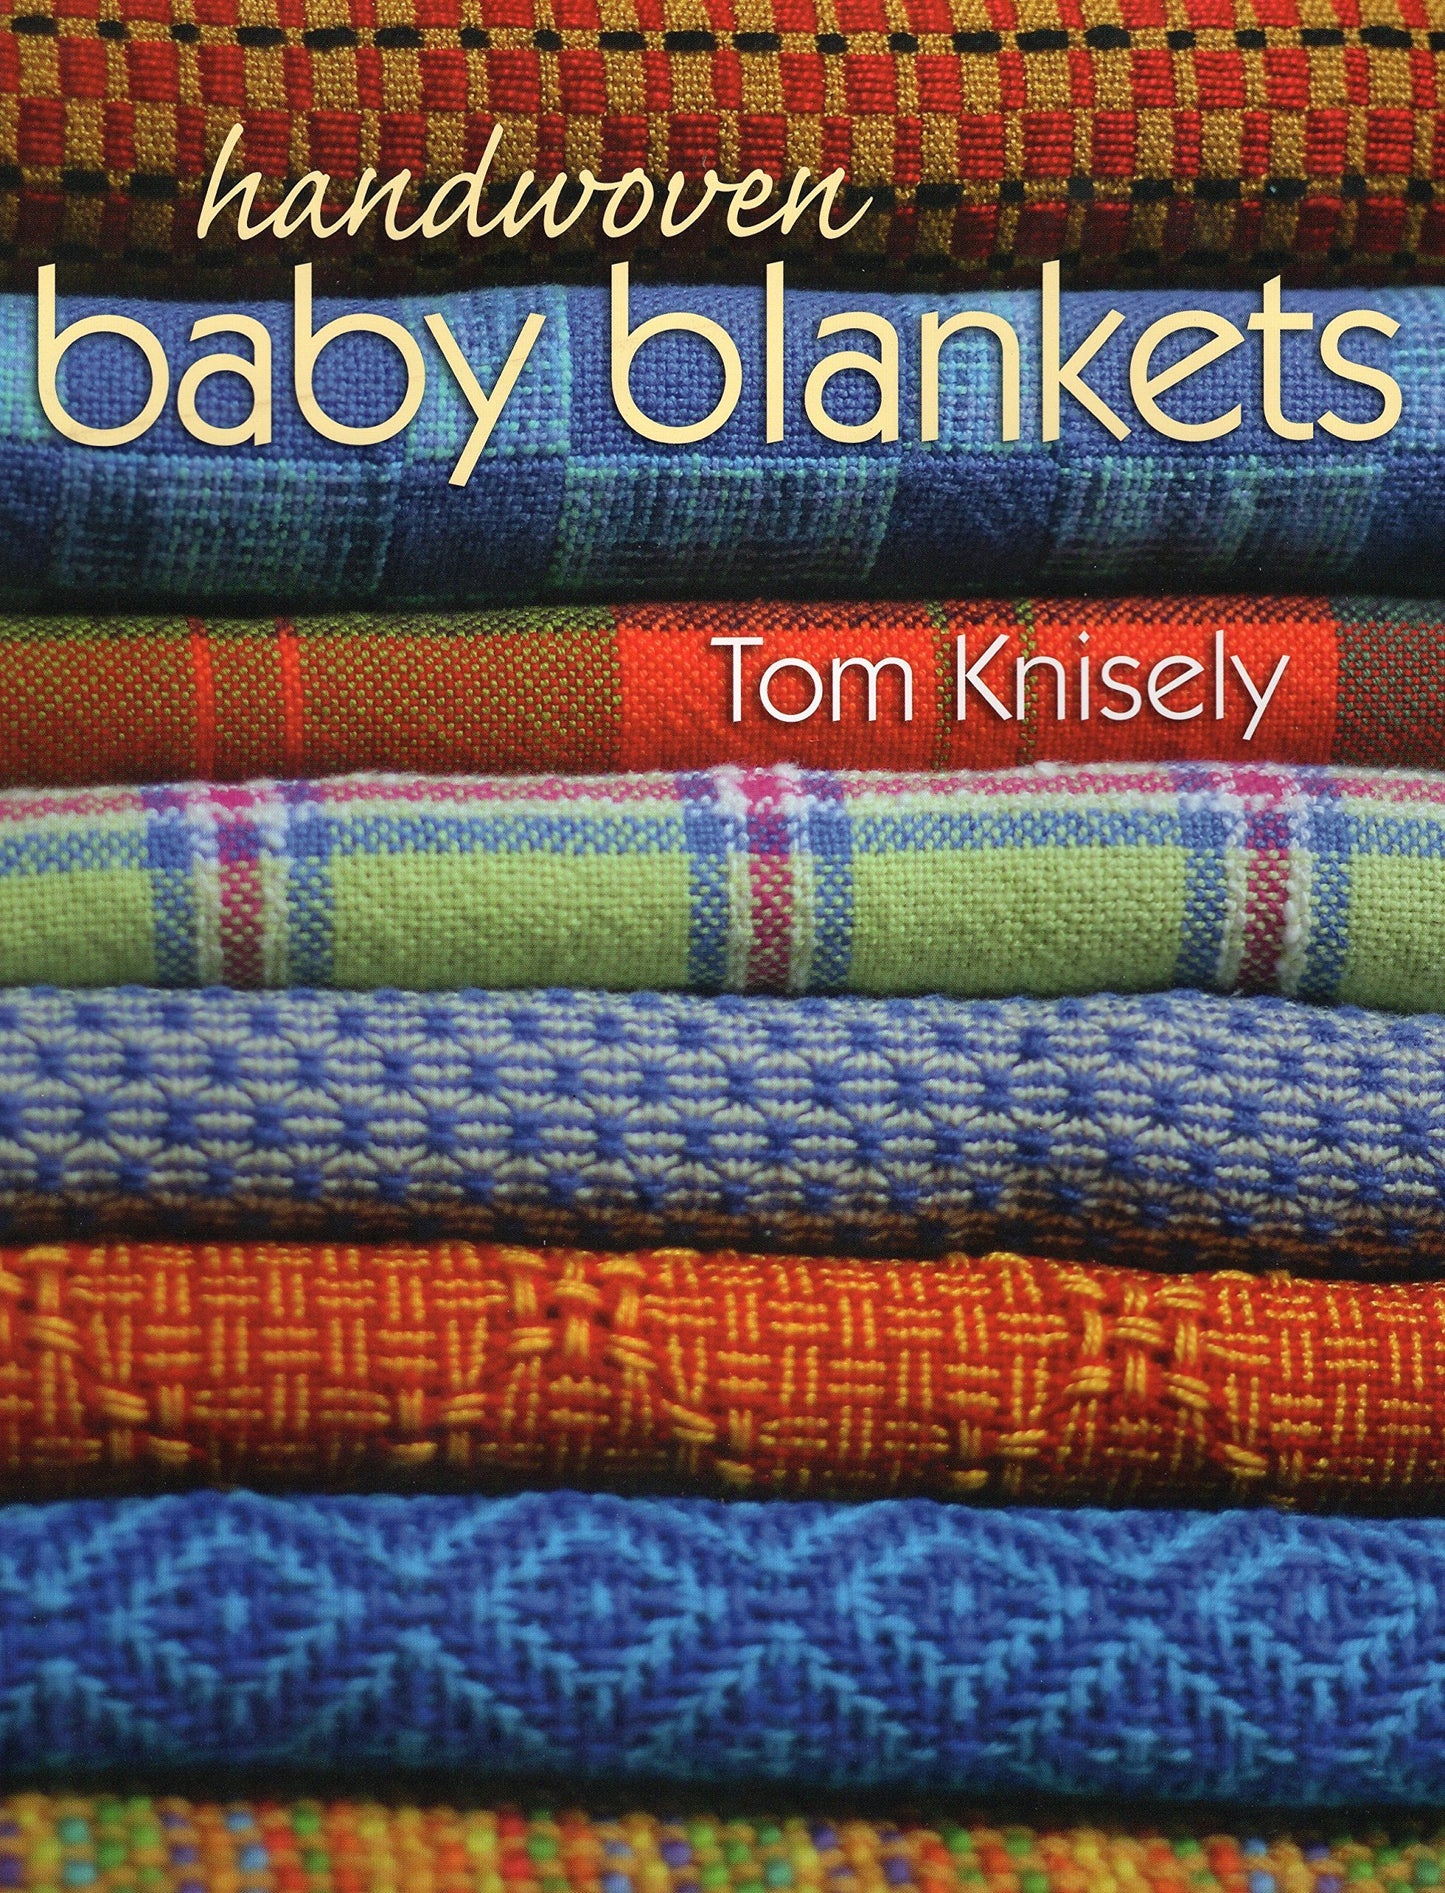 Handwoven Baby Blankets - Tom Knisely